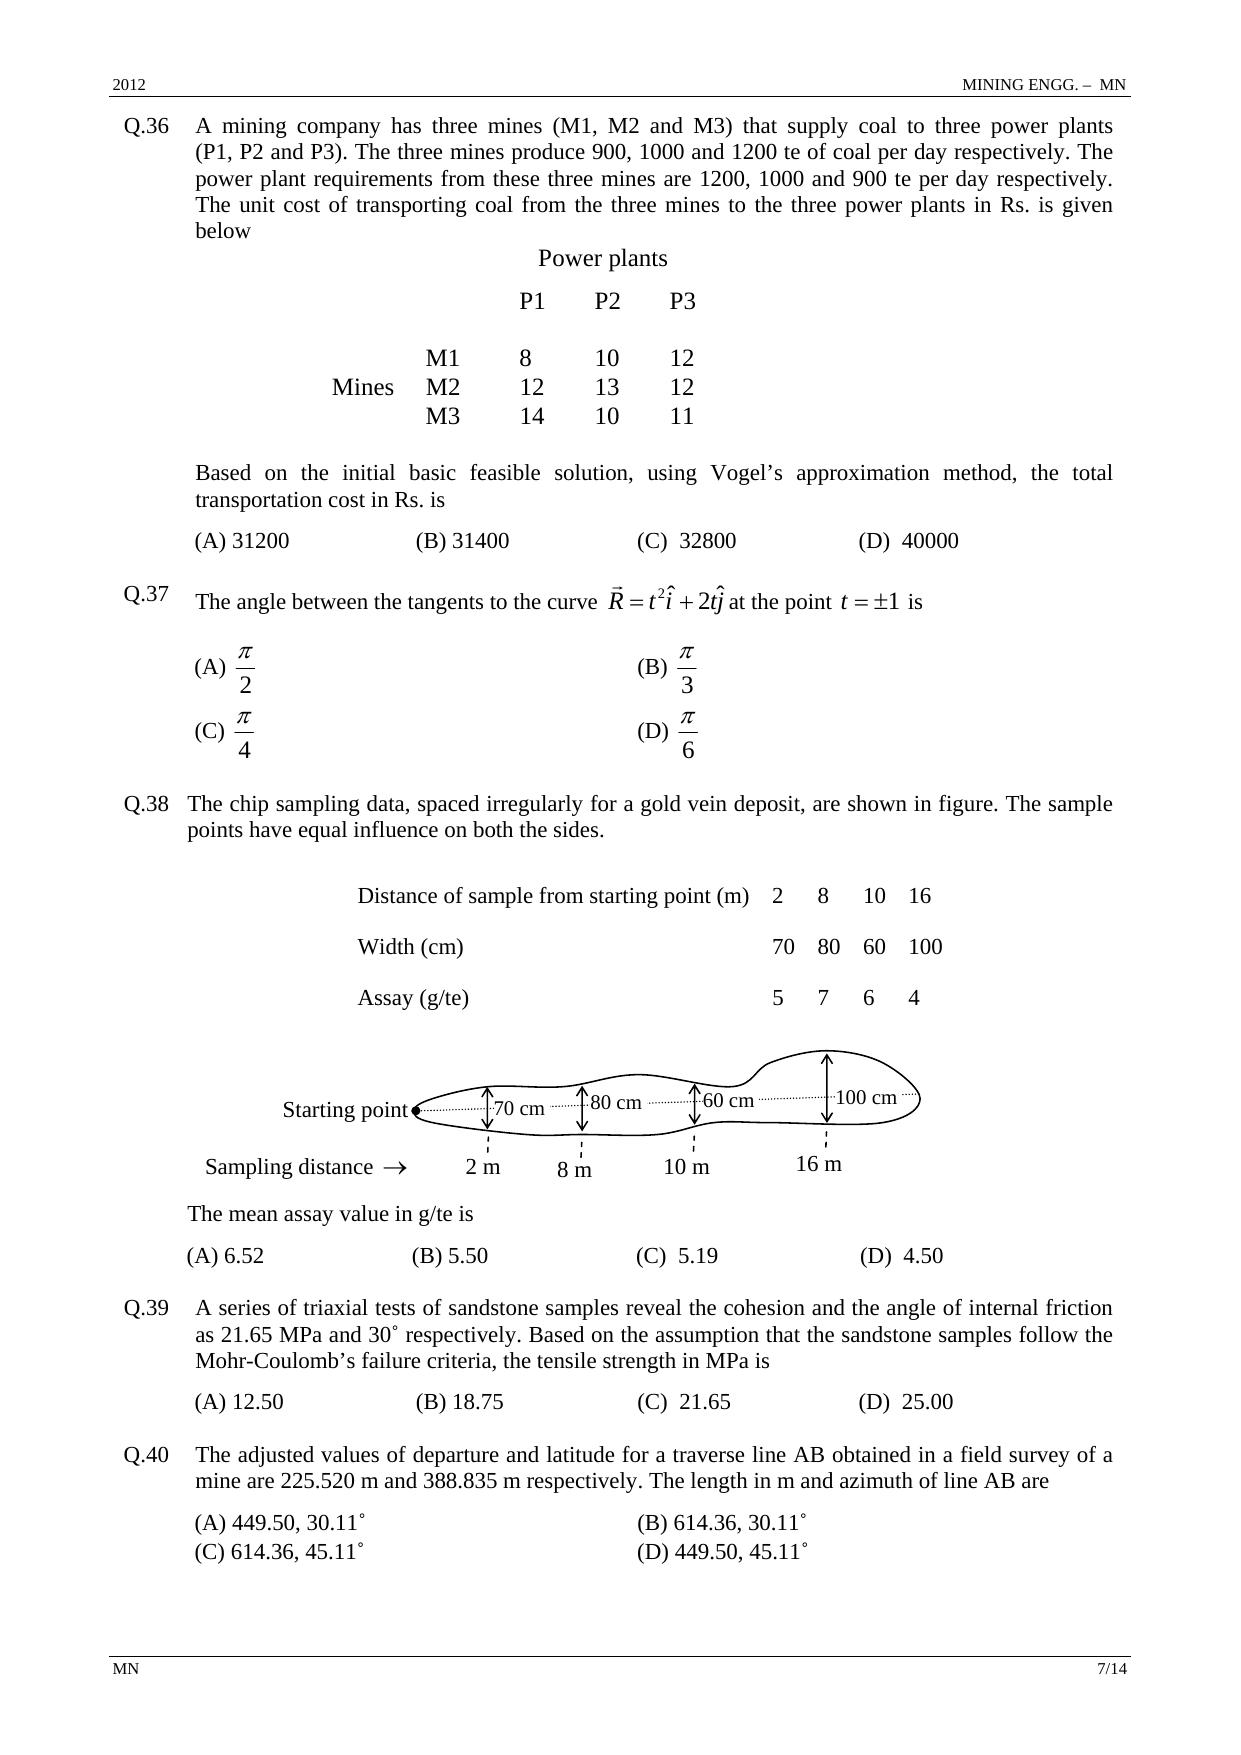 GATE 2012 Mining Engineering (MN) Question Paper with Answer Key - Page 7